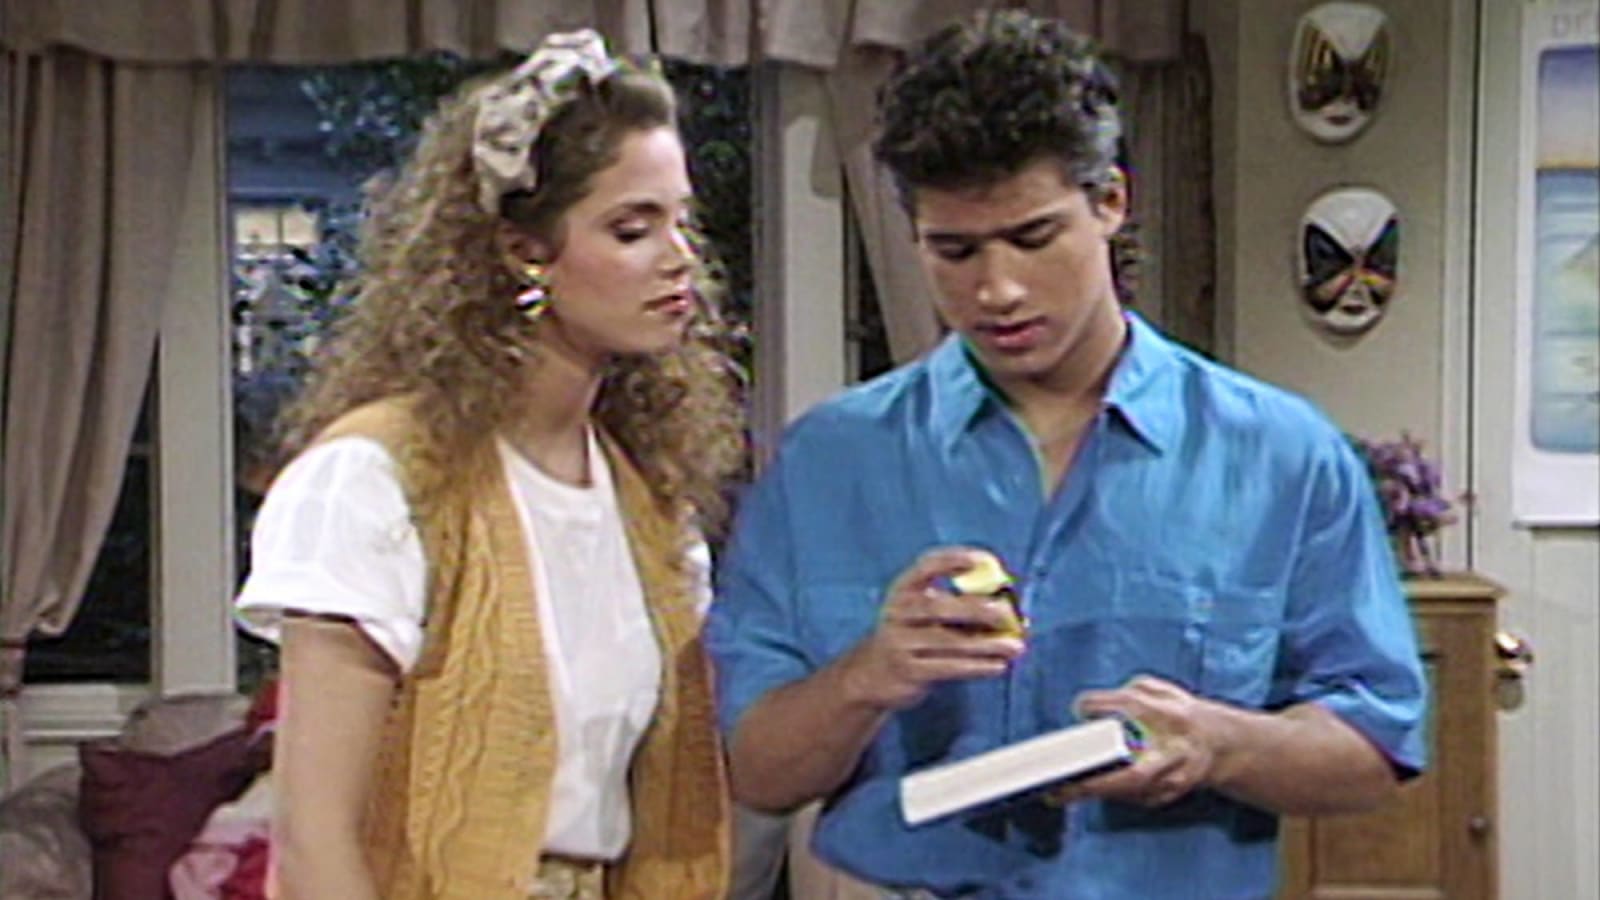 The 25 most classic 'Saved by the Bell' moments